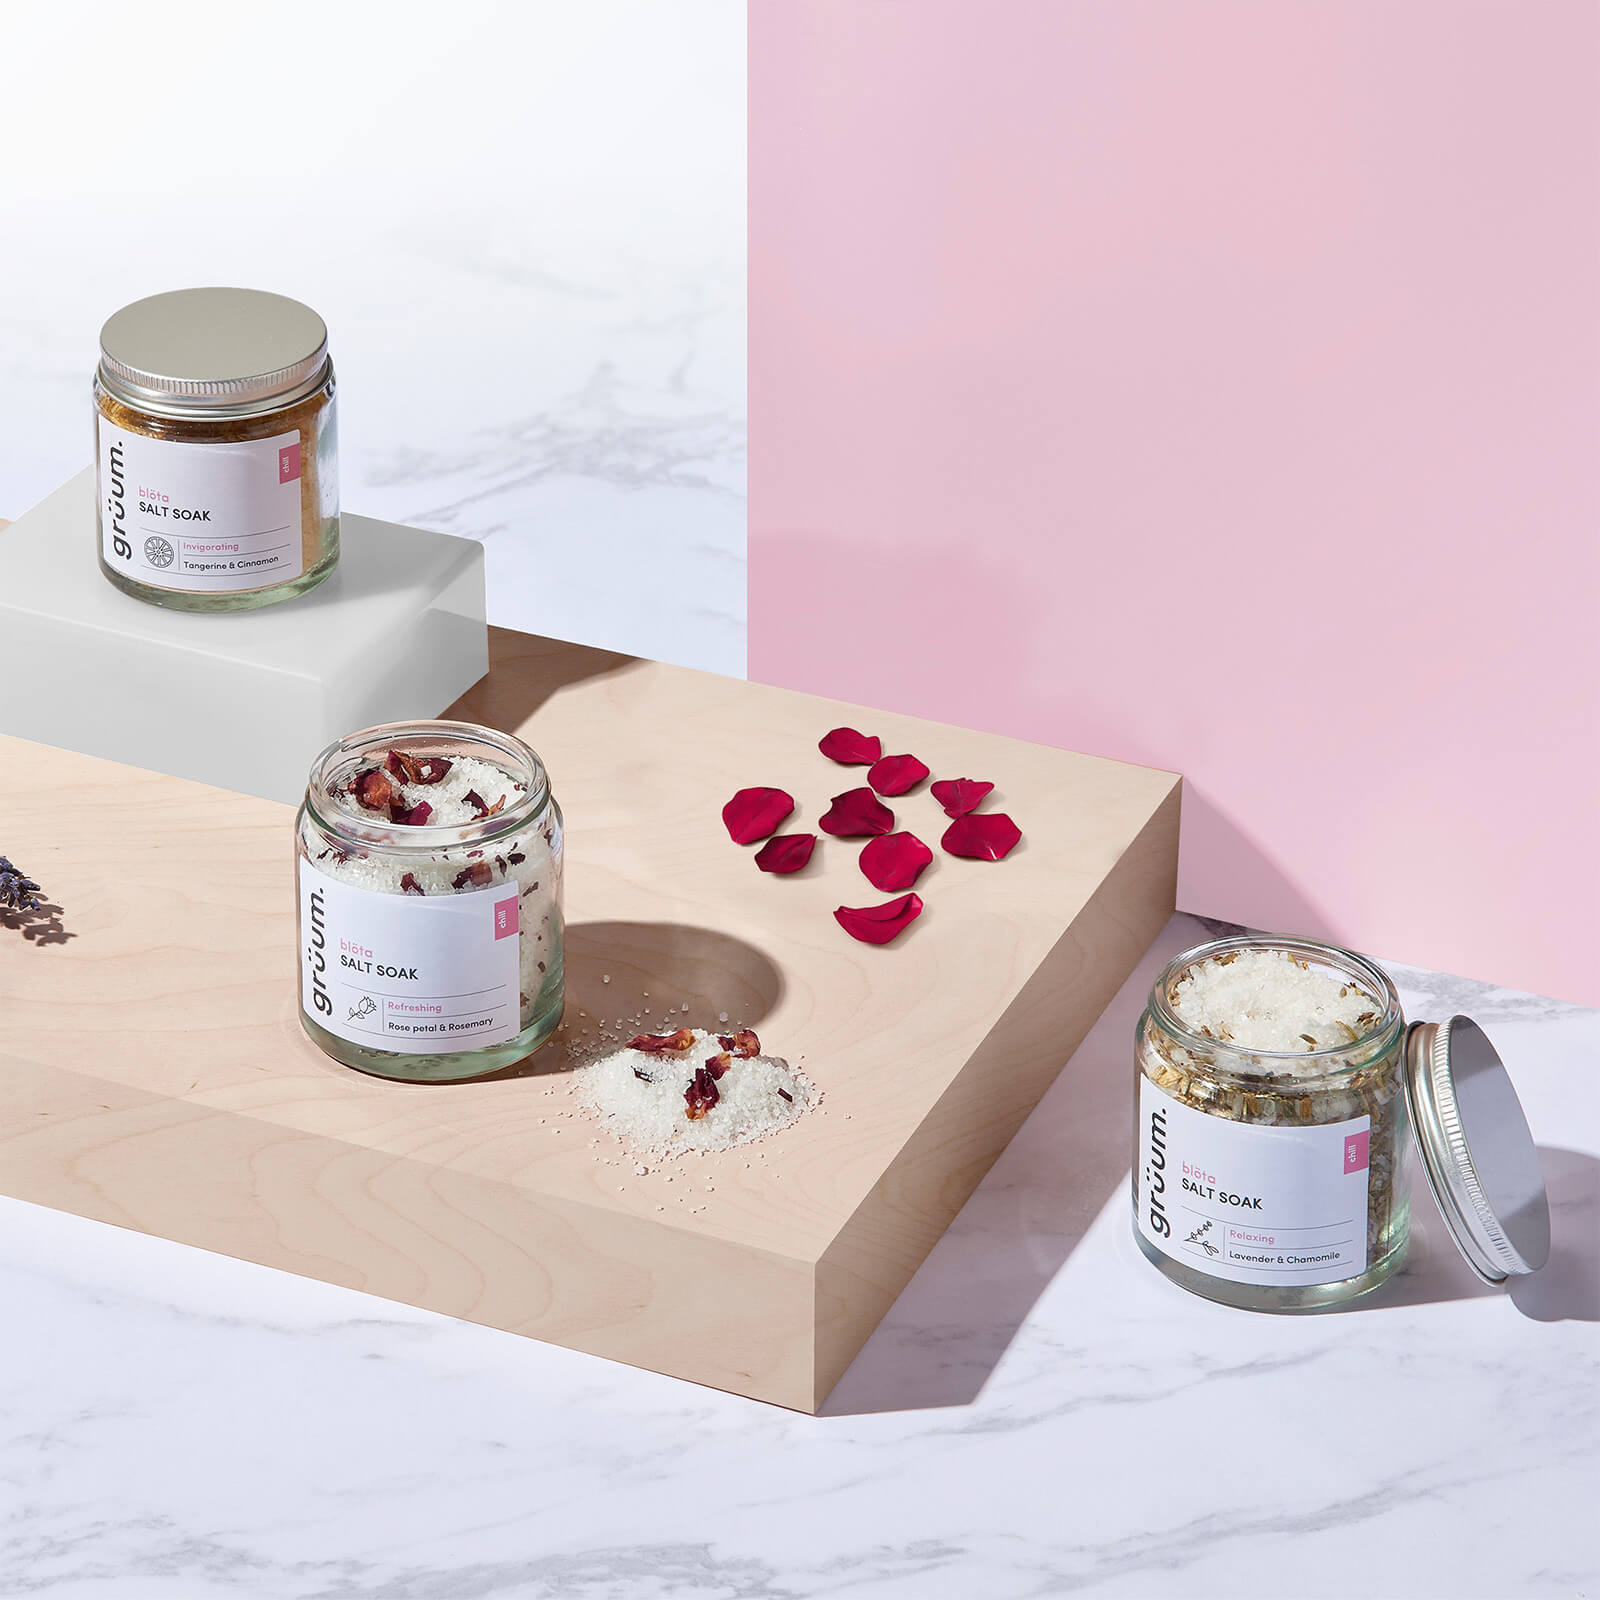 Artikel klicken und genauer betrachten! - Sprinkled into hot water, the dried botanicals in grüum’s blöta Bath Salt Soak come to life, infusing the atmosphere with relaxing aromas to enhance your bath-time ritual.  A calming blend of chamomile and lavender promotes a serene ambiance to help you unwind and let go of daily stress. Skin feels soft, muscles feel soothed and your body feels tranquil and ready for a restful sleep. | im Online Shop kaufen